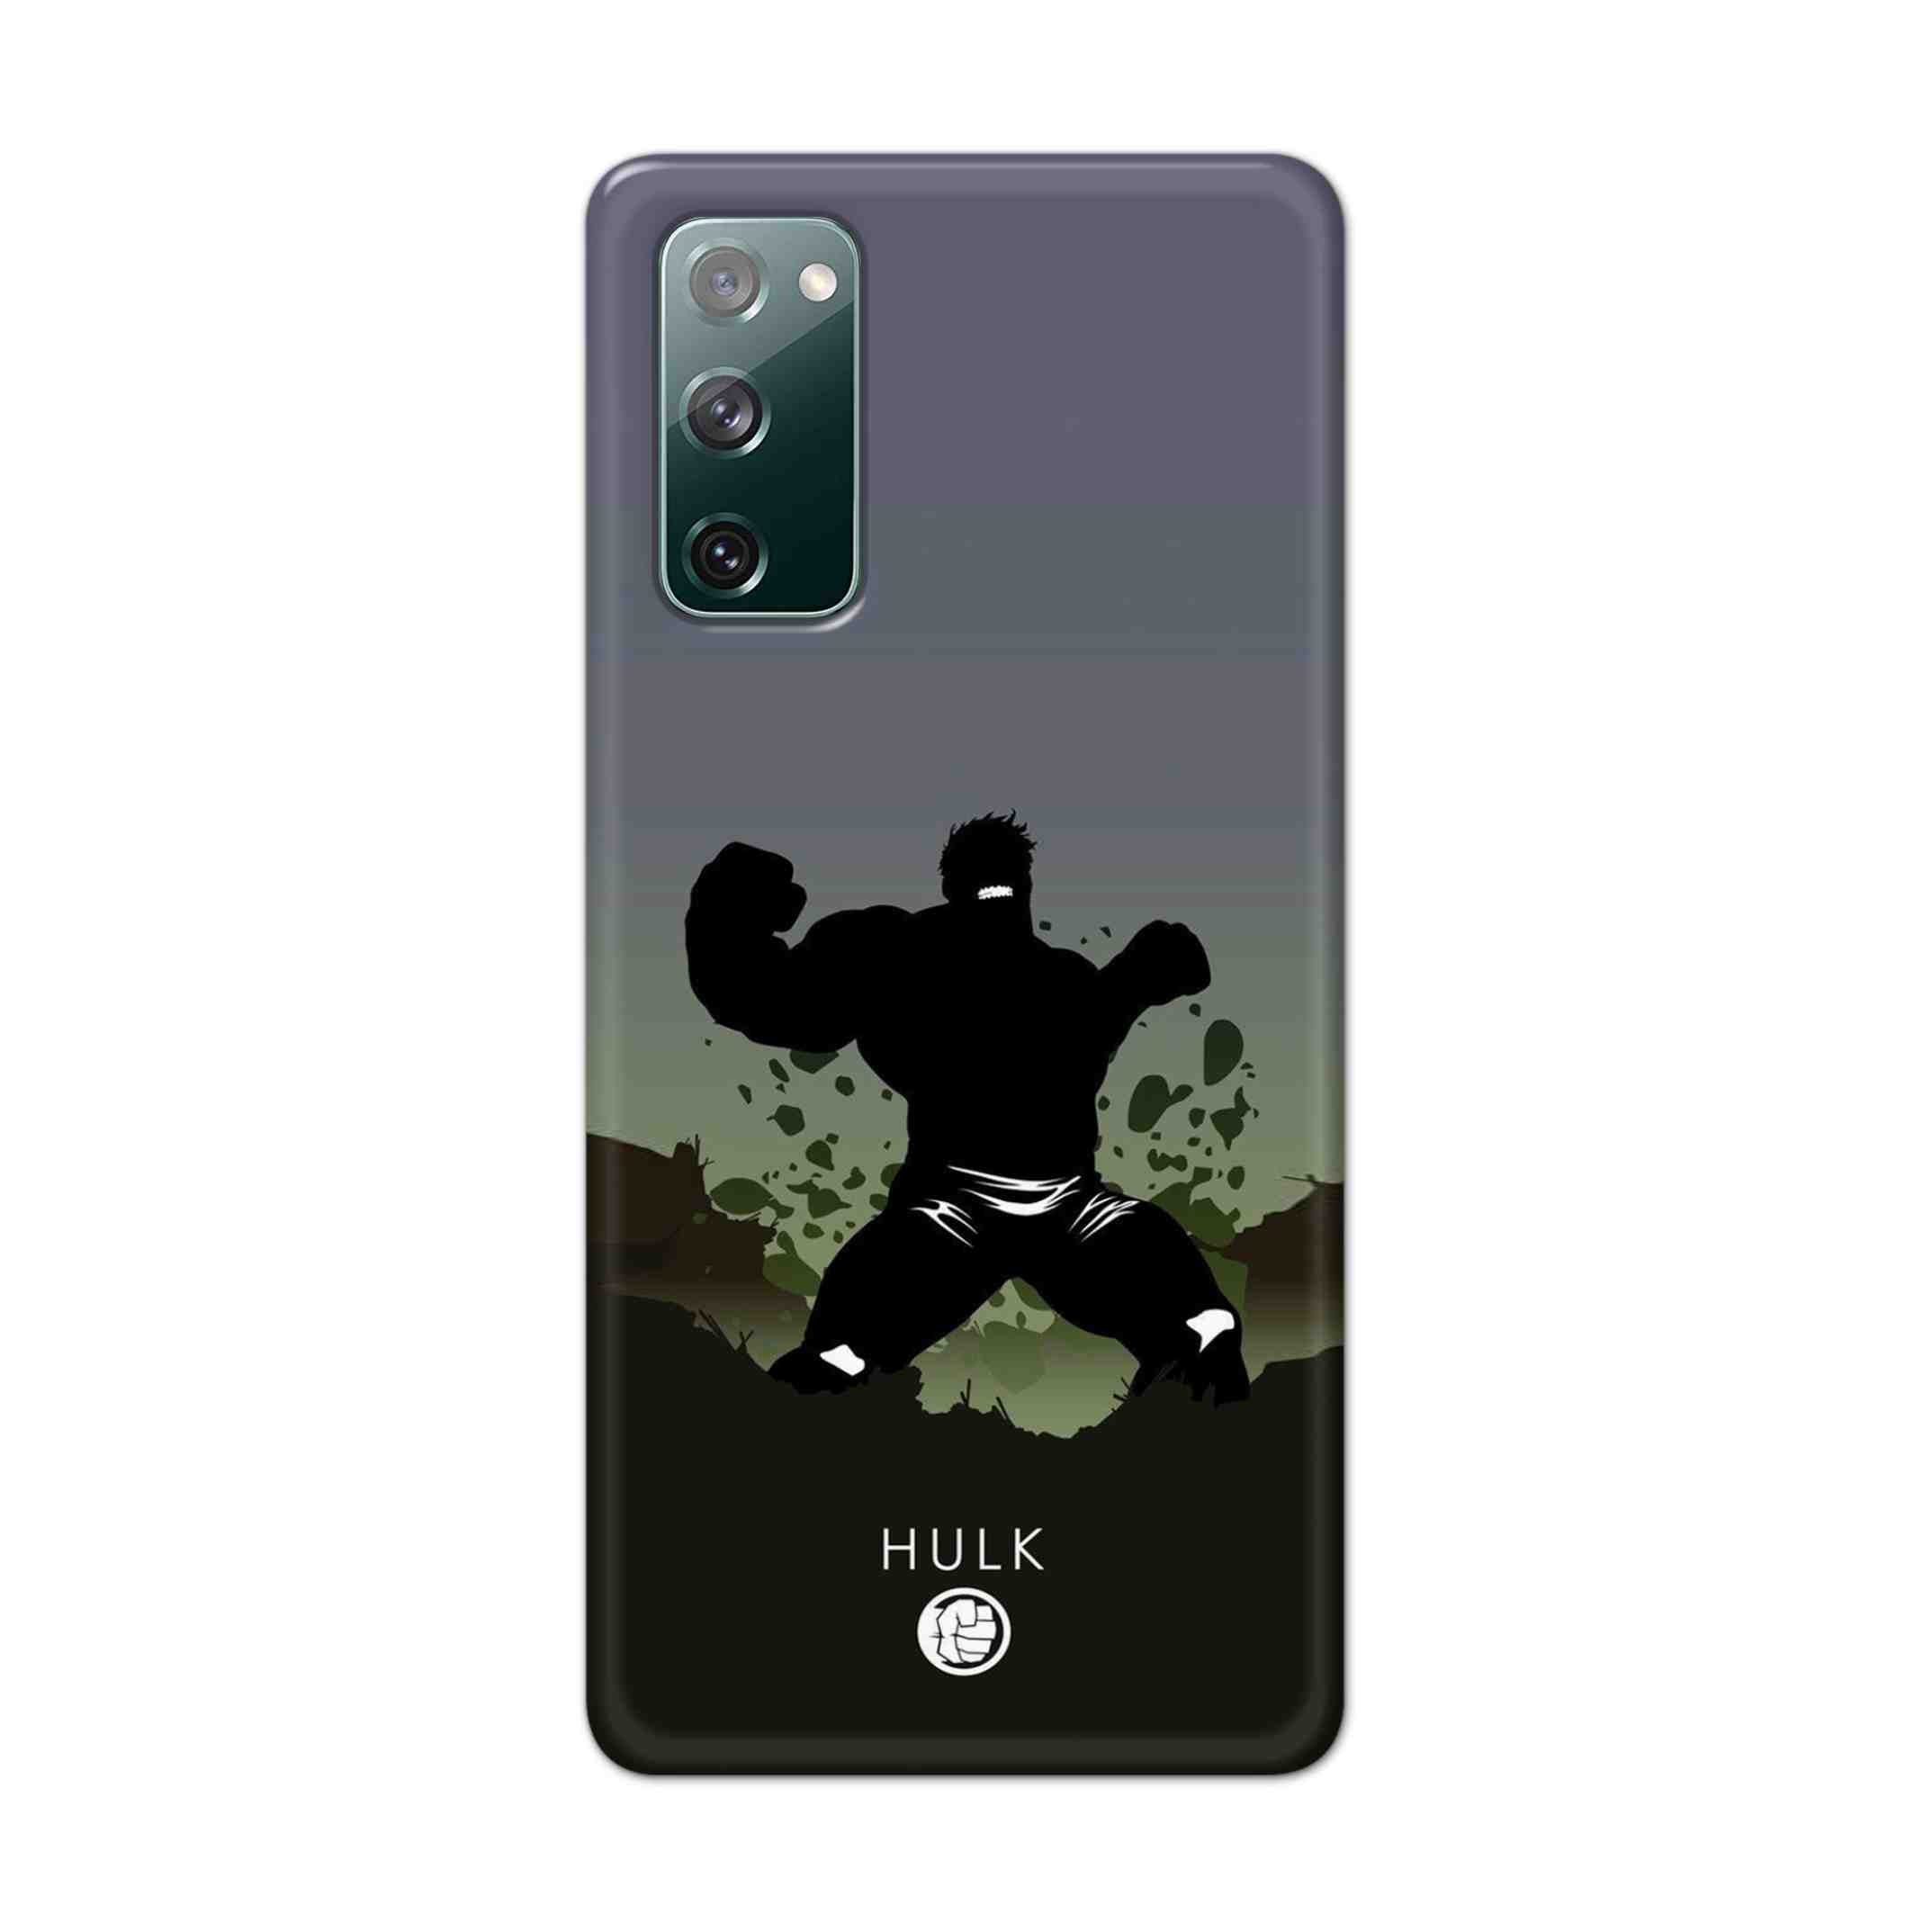 Buy Hulk Drax Hard Back Mobile Phone Case Cover For Samsung Galaxy S20 FE Online